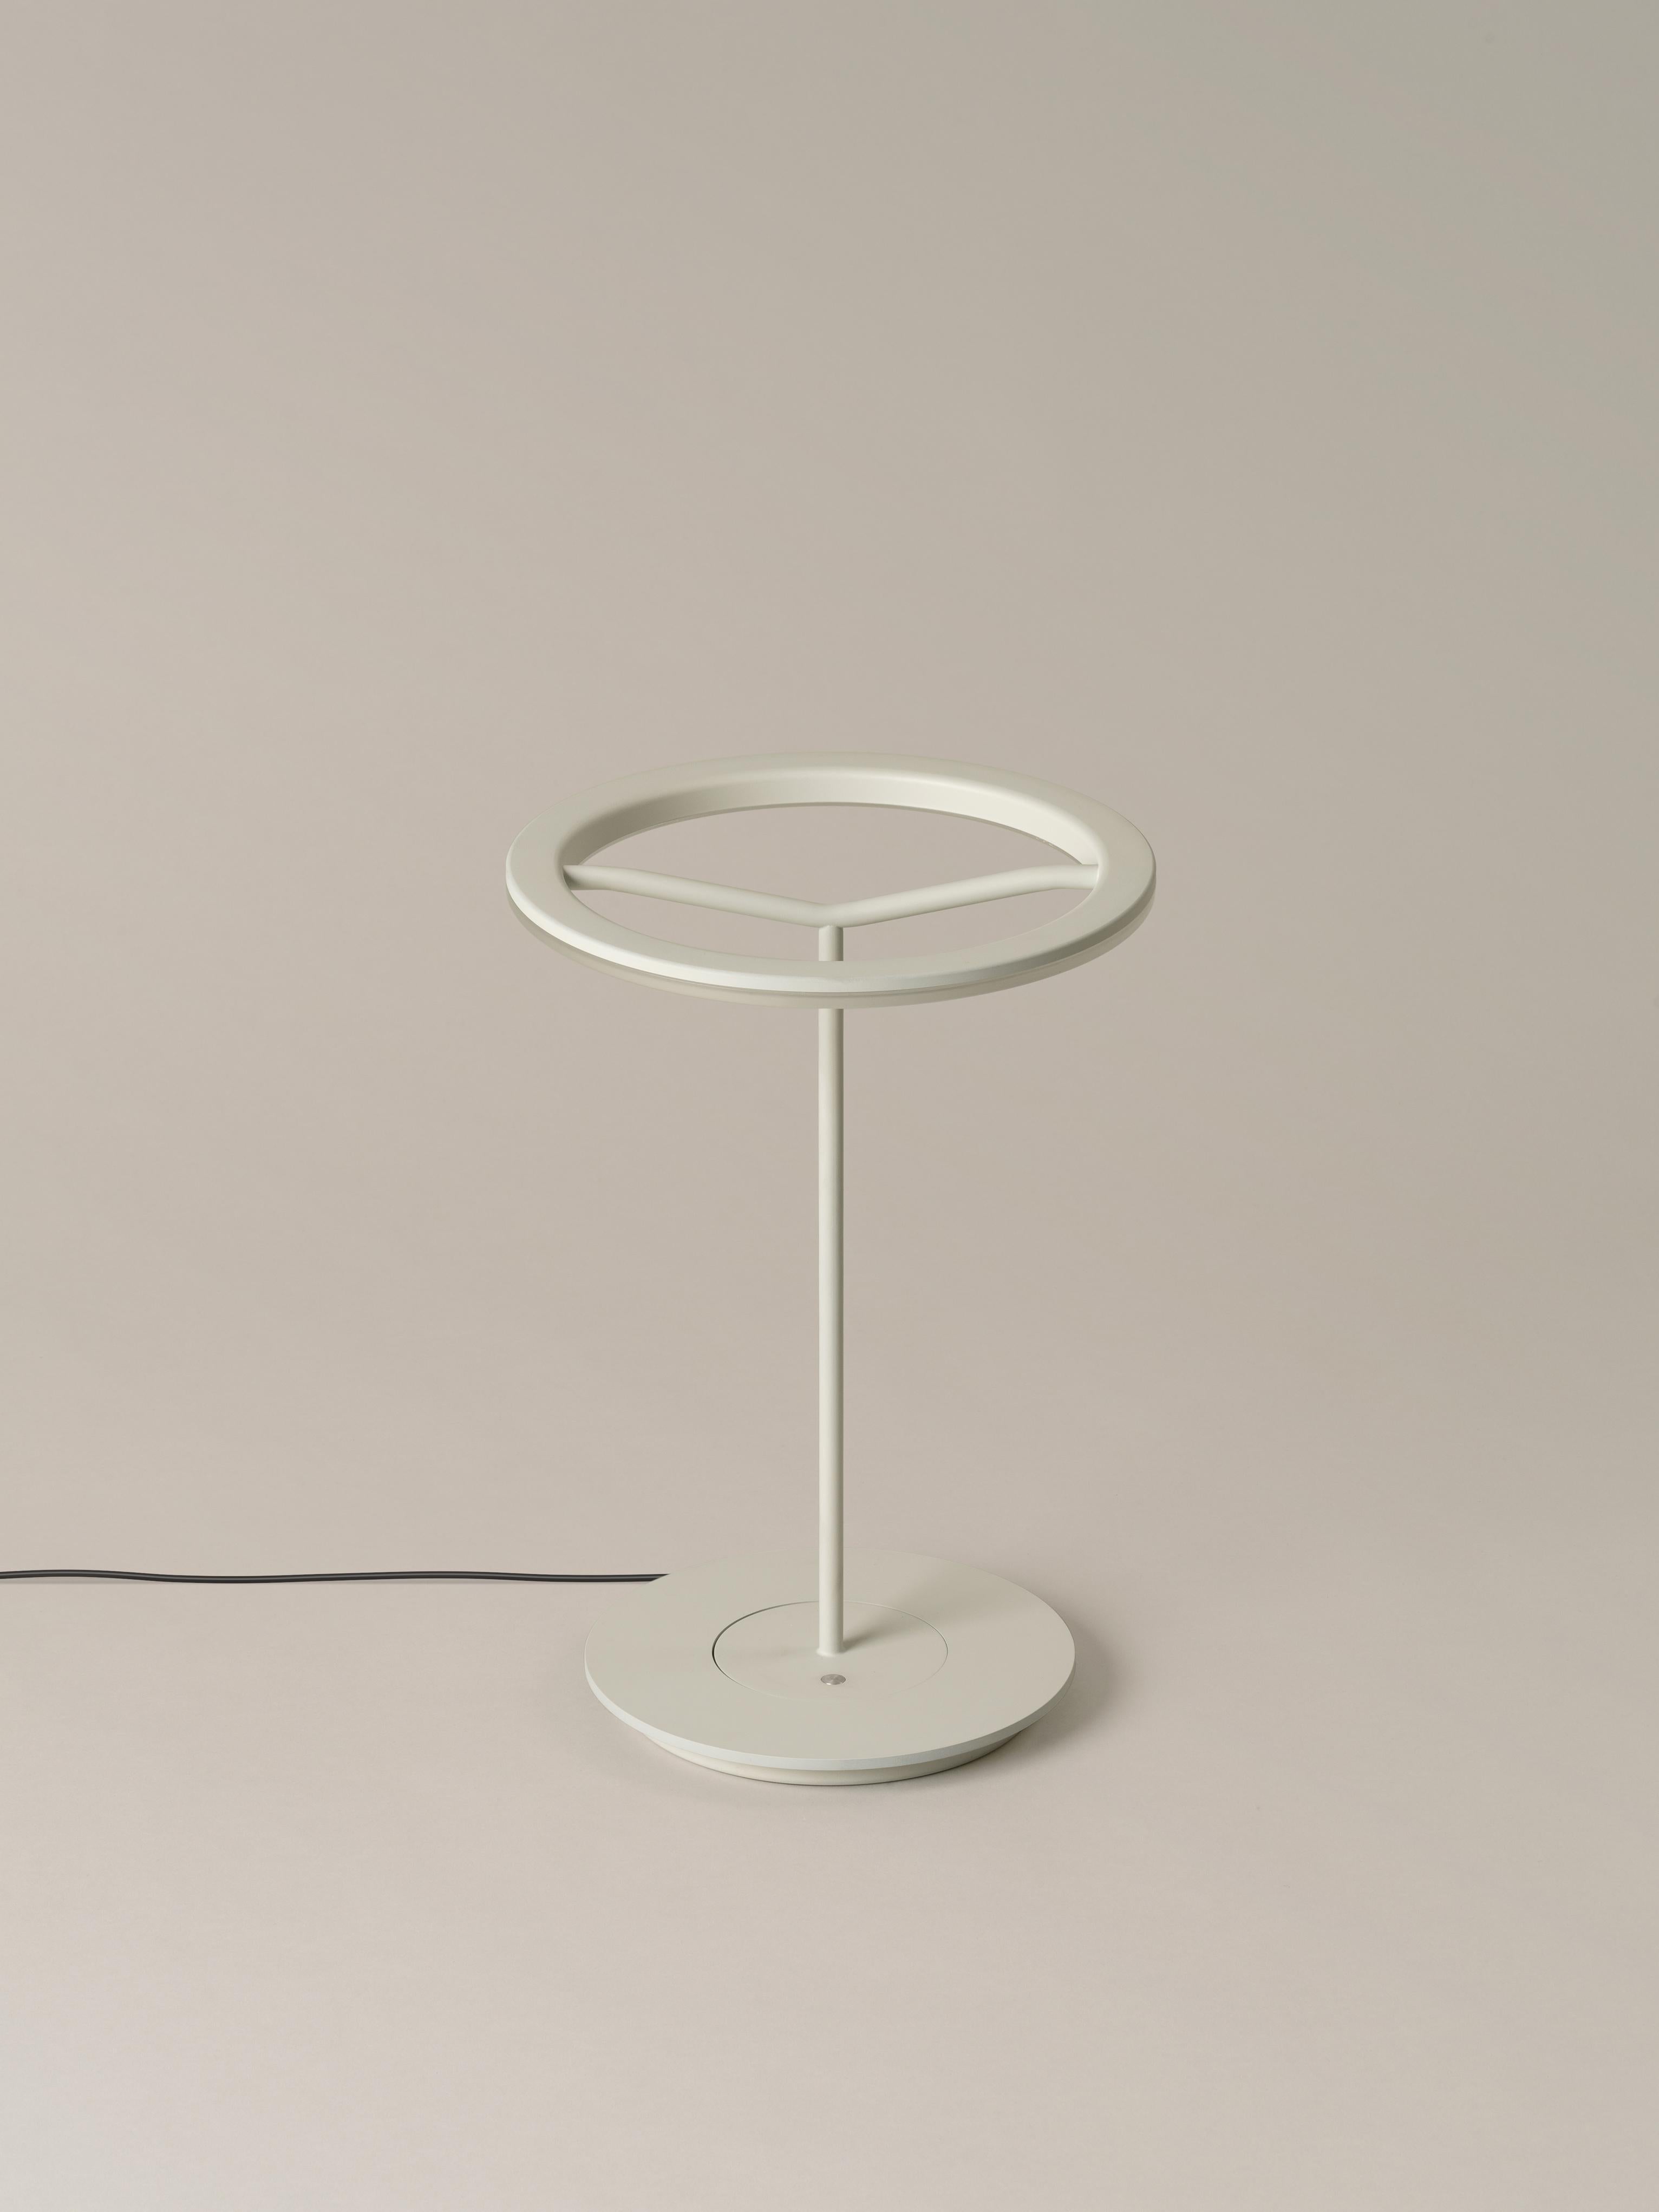 Small white sin table lamp by Antoni Arola.
Dimensions: D 25 x H 36 cm.
Materials: Metal.
Available in white or graphite, with or without shade.

A lamp that combines simplicity and technology to create a lucent ring of light suspended in the